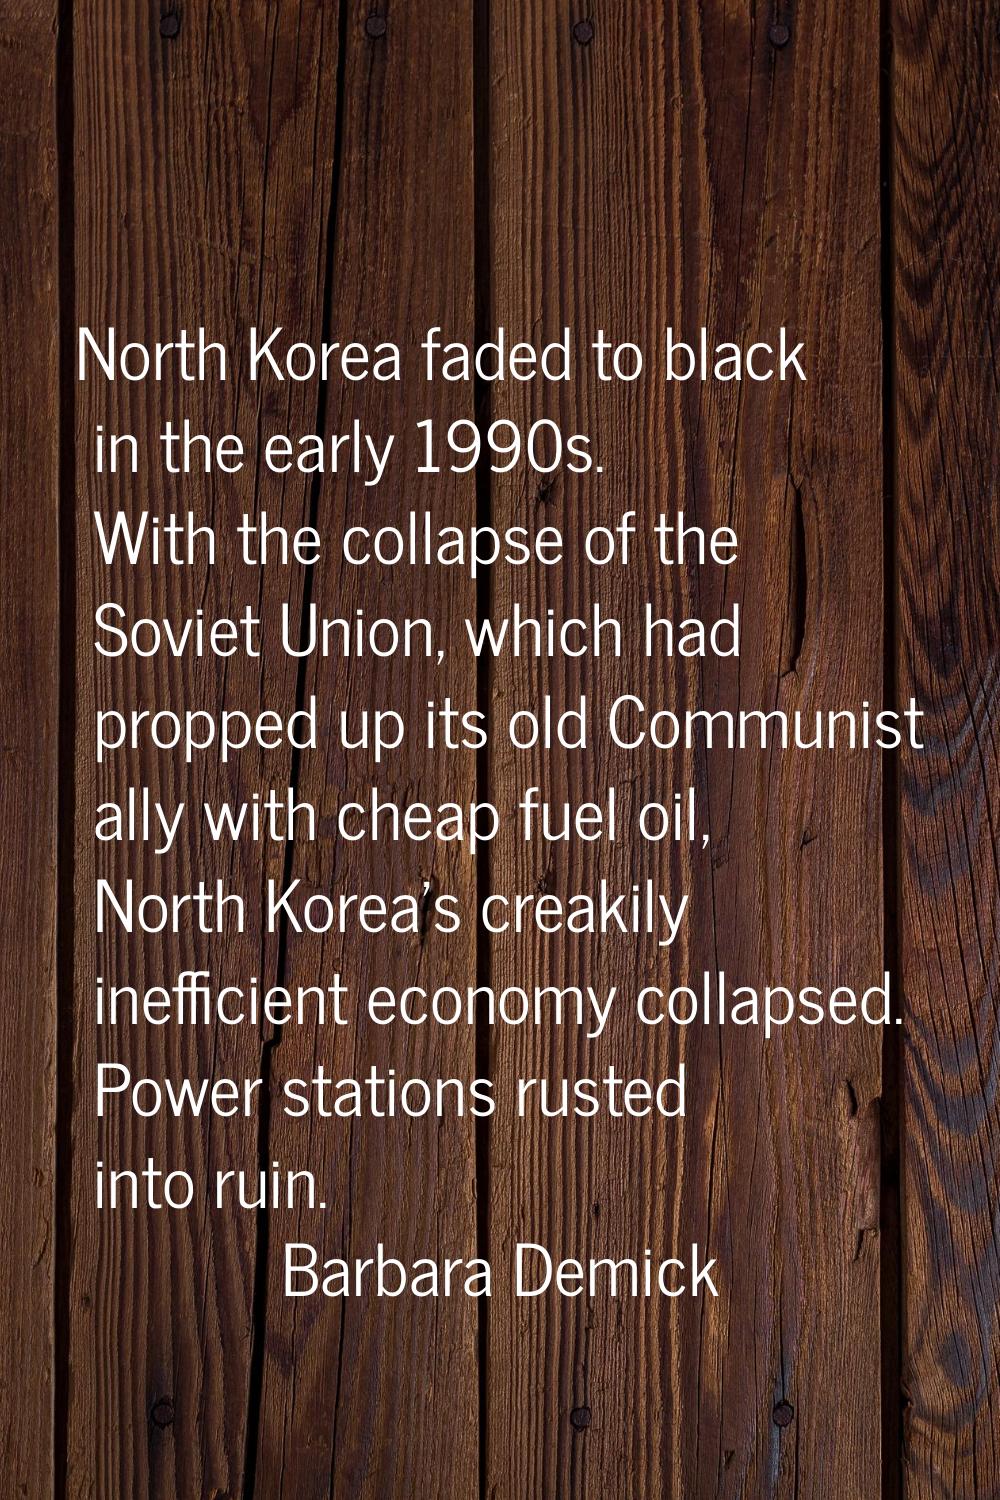 North Korea faded to black in the early 1990s. With the collapse of the Soviet Union, which had pro